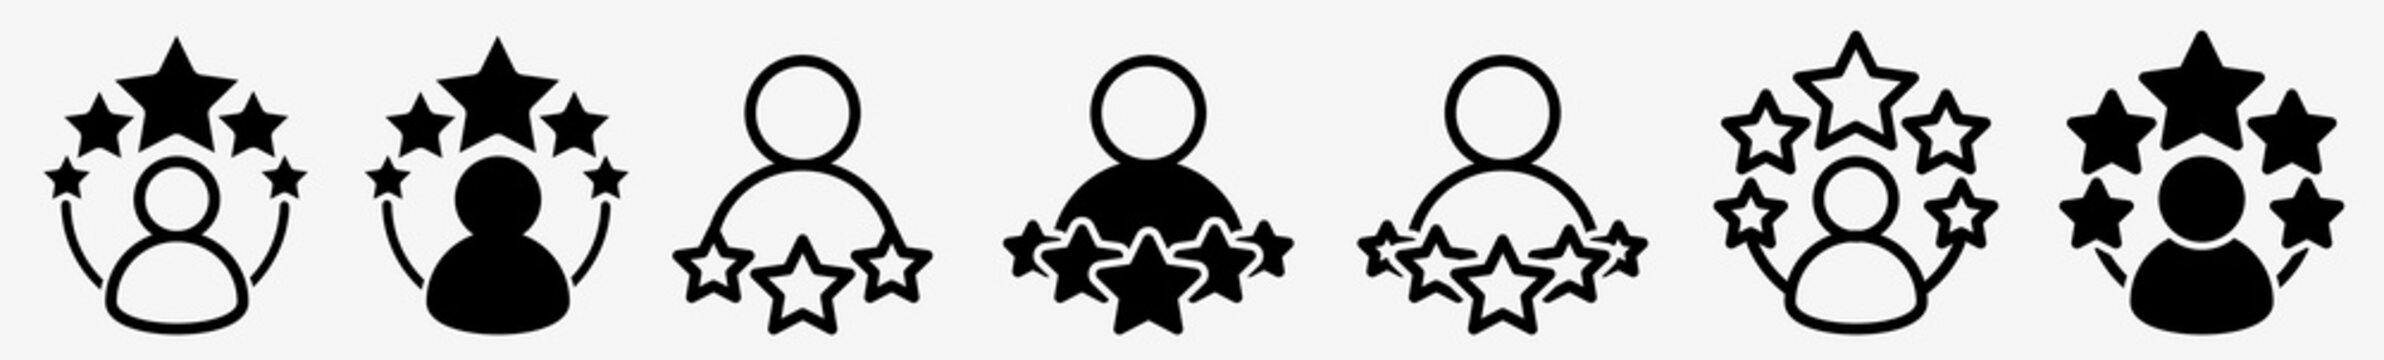 Experience Icon 5 Stars Experience Set | Experiences Icon Best Rating Vector Illustration Logo | Five Stars Experience-Icon Isolated Work User Experience